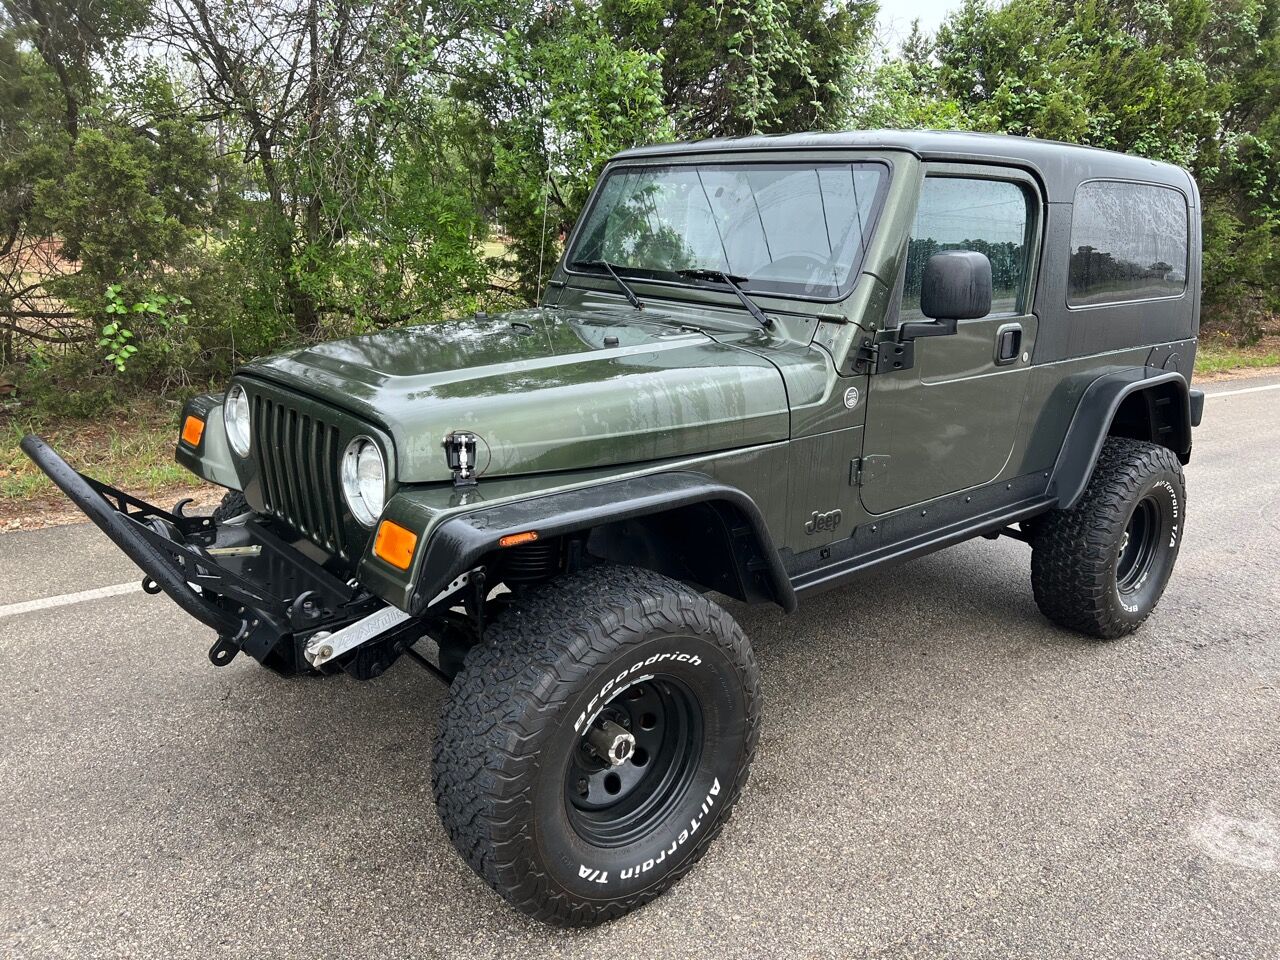 2006 Jeep Wrangler For Sale In Texas ®